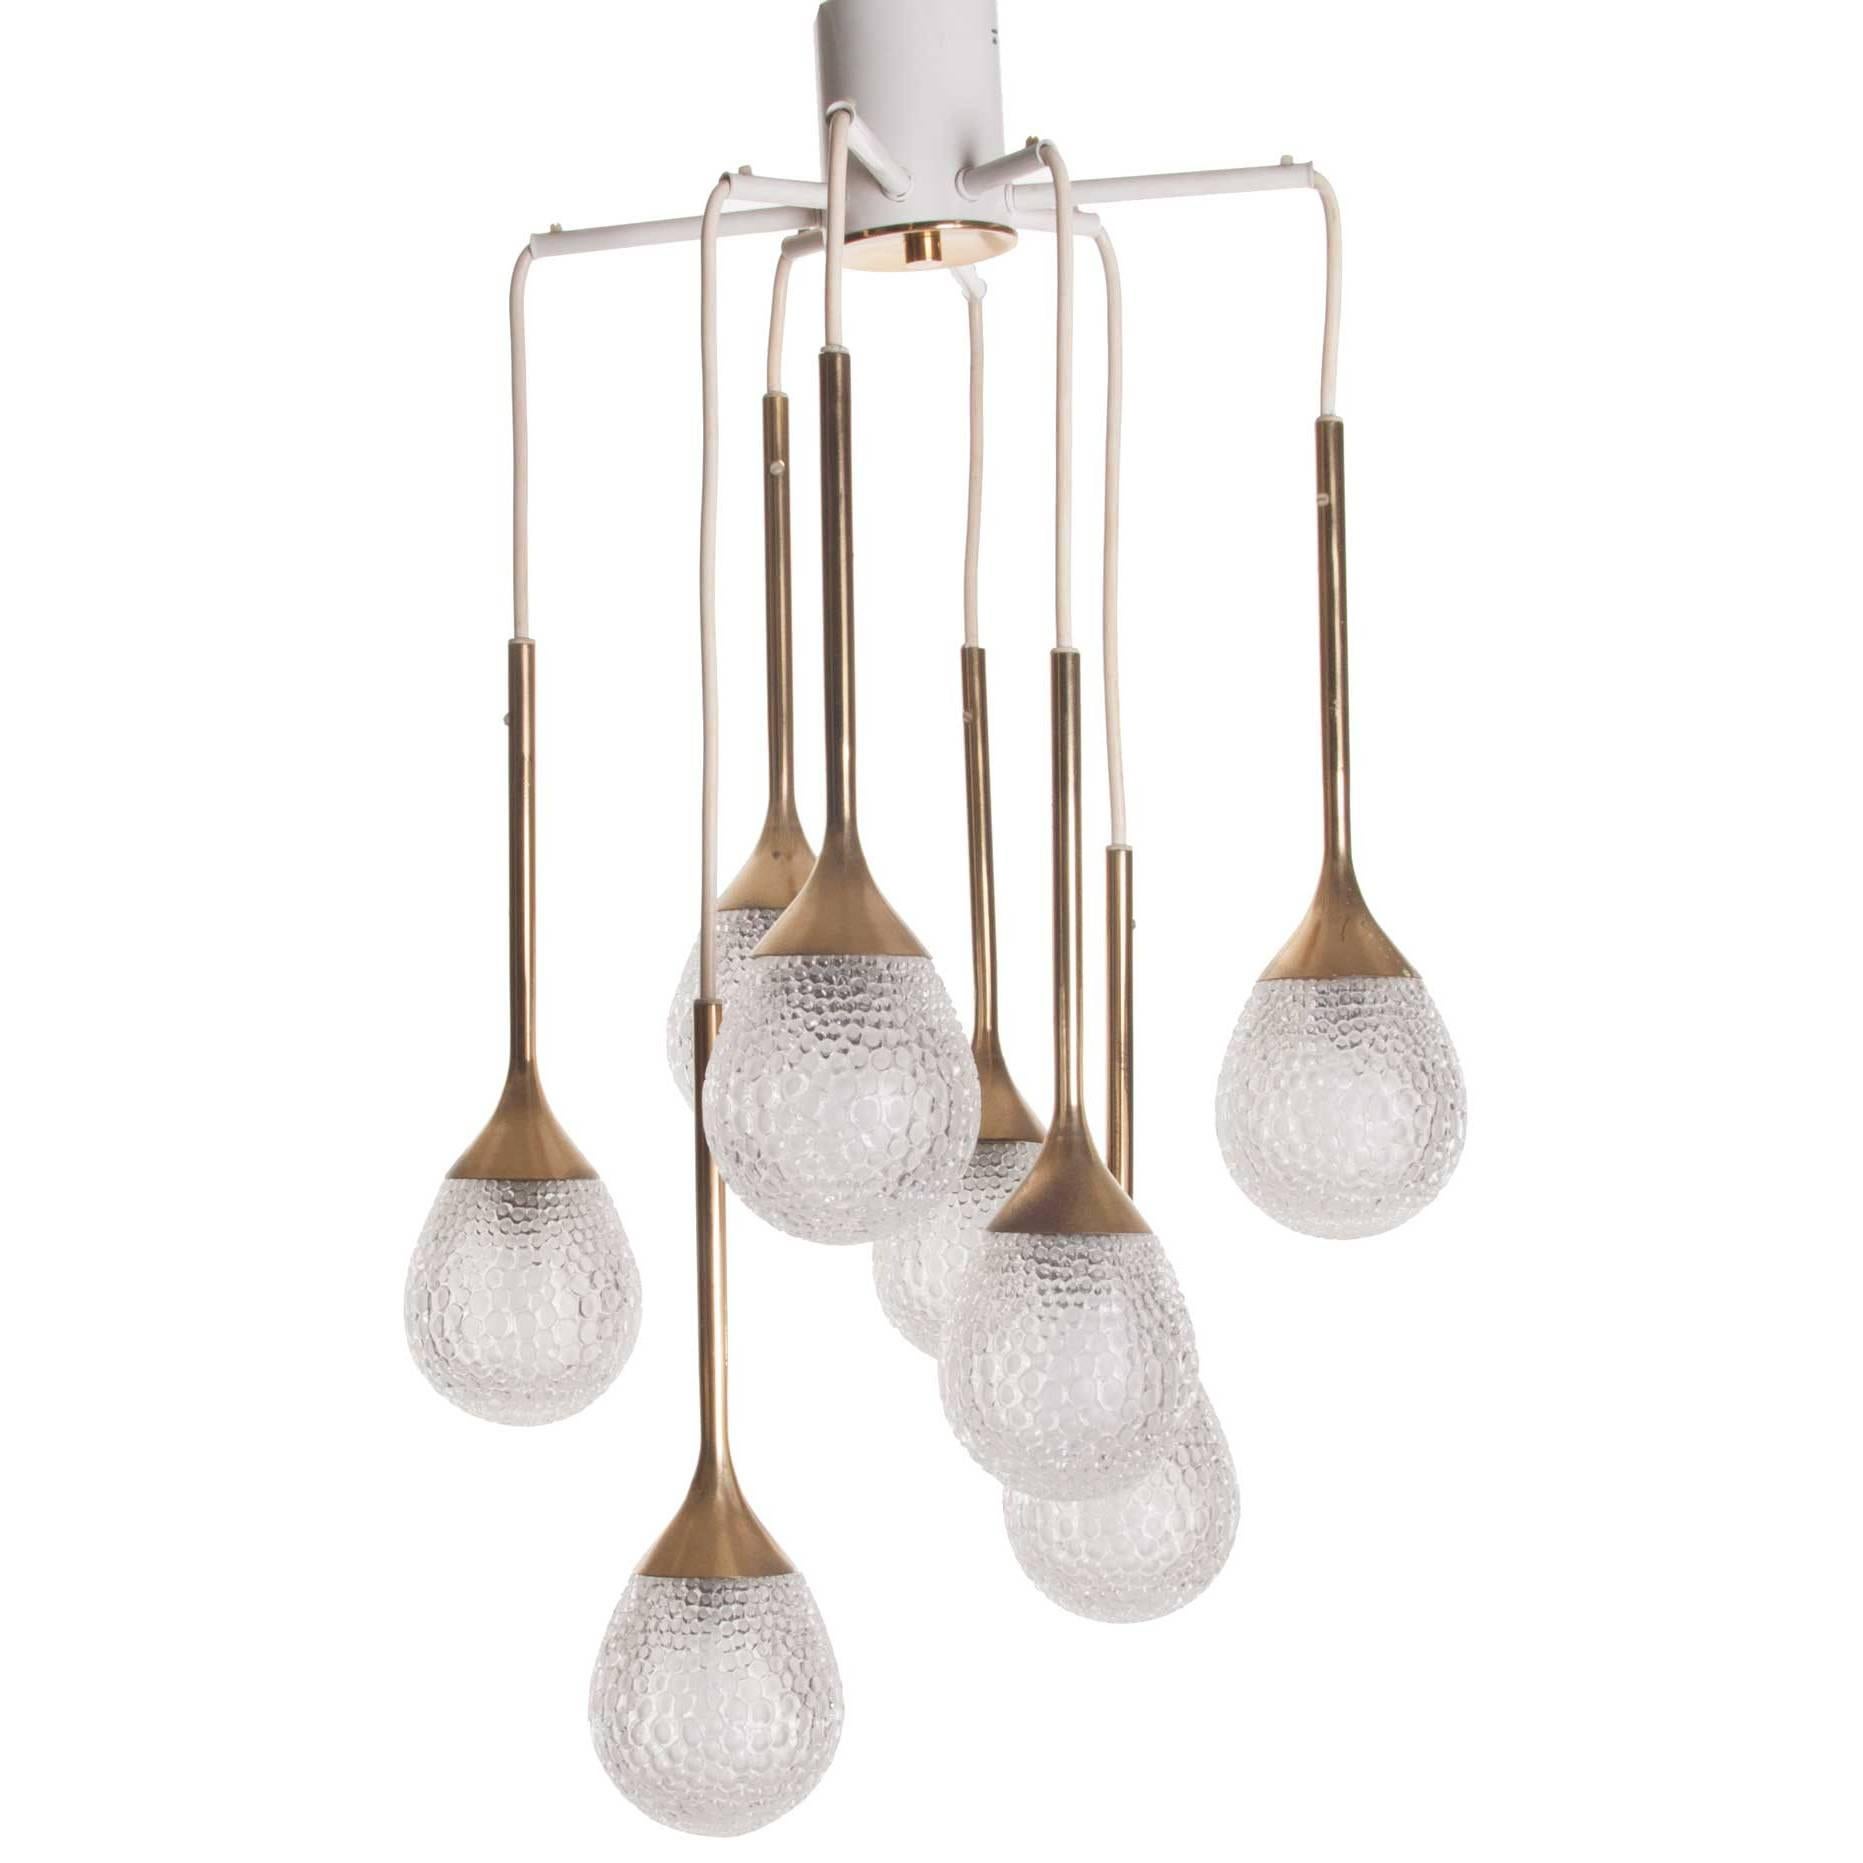 Stunning chandelier consists of eight lights and arms with beautiful pressed glass drops. The combination of the brass stem, glass drops and random length of the stem makes it an eye-catcher!